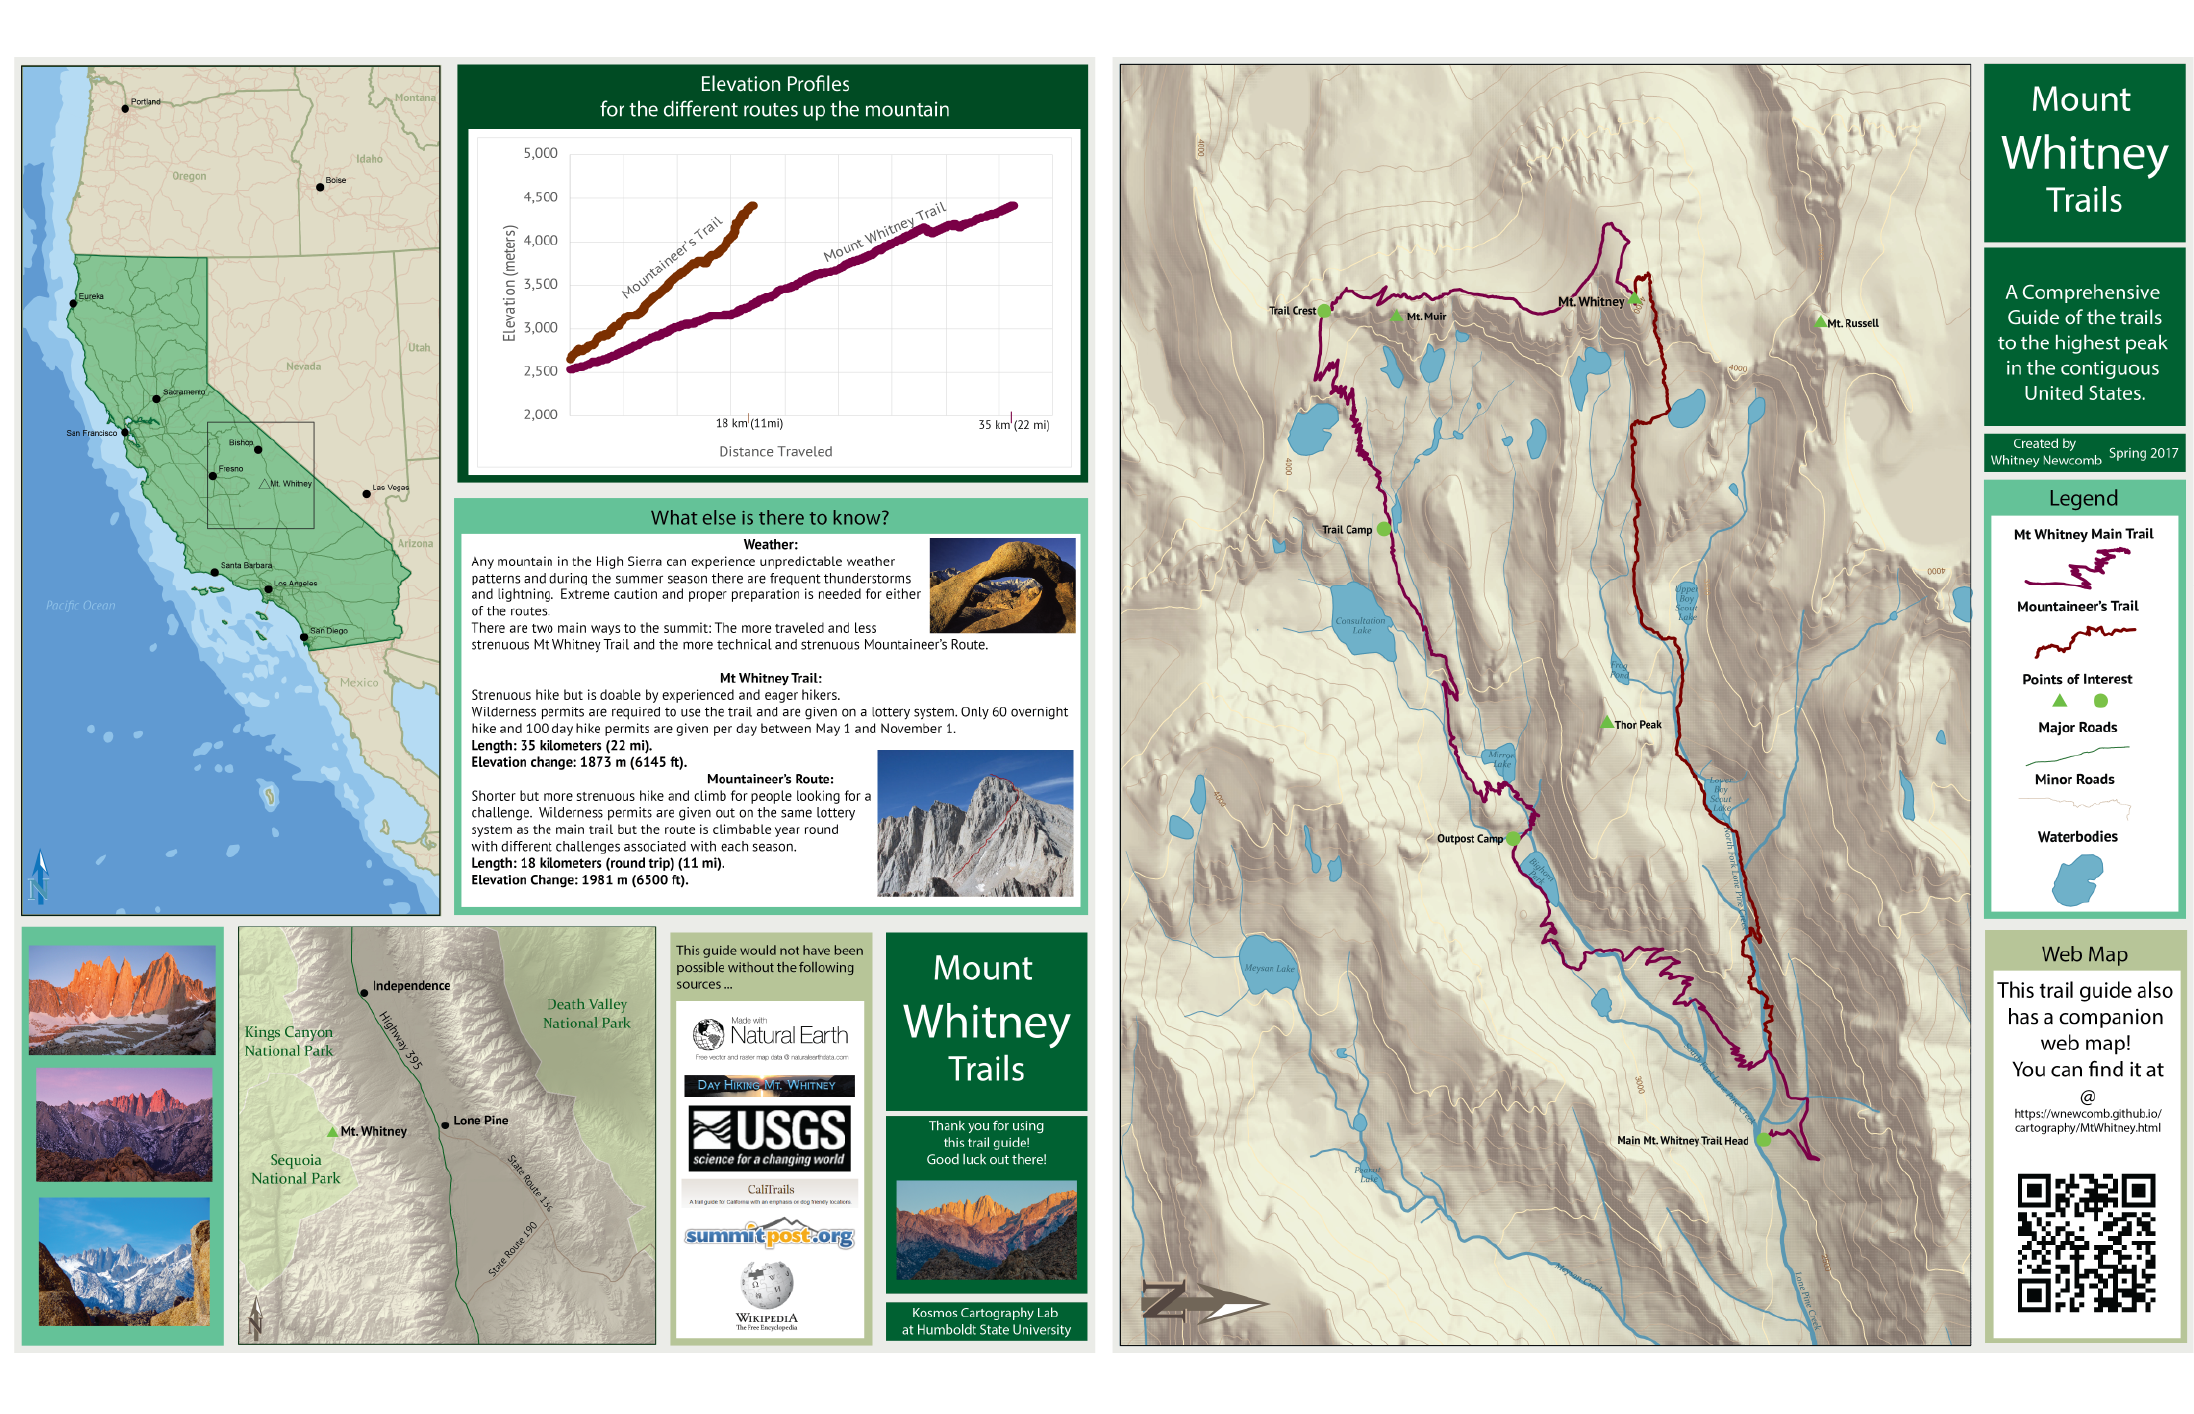 Trail Guide to Mt Whitney Routes